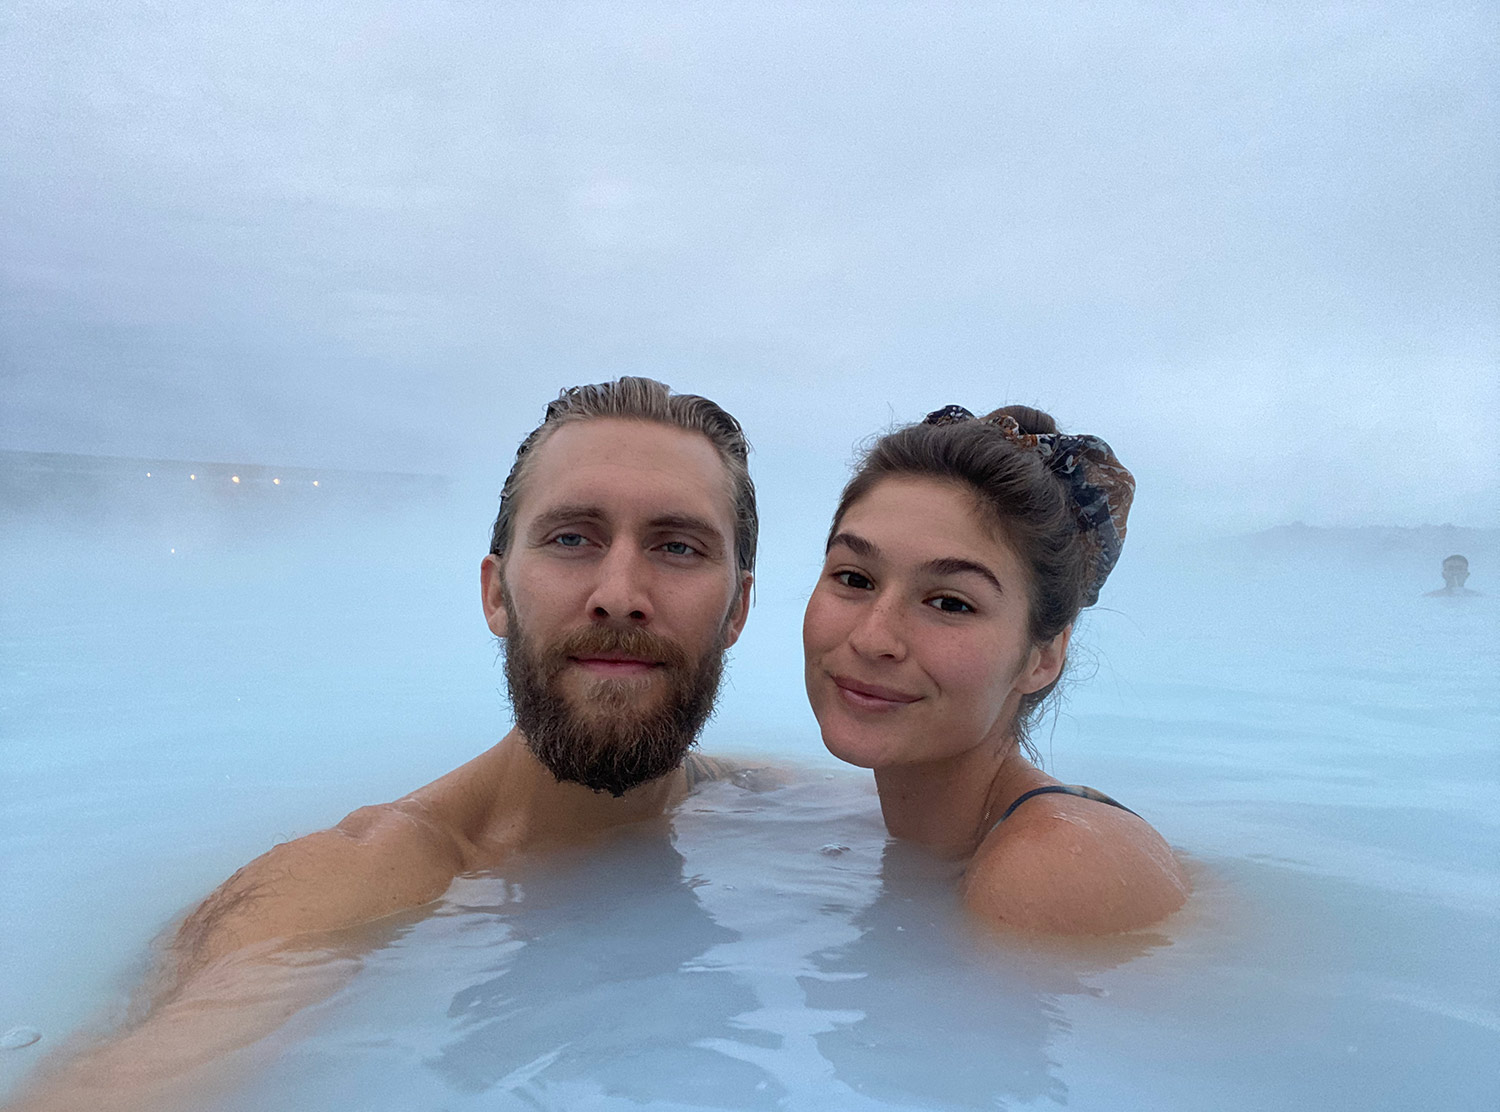 Nicolo and Abi at the Blue Lagoon in Iceland